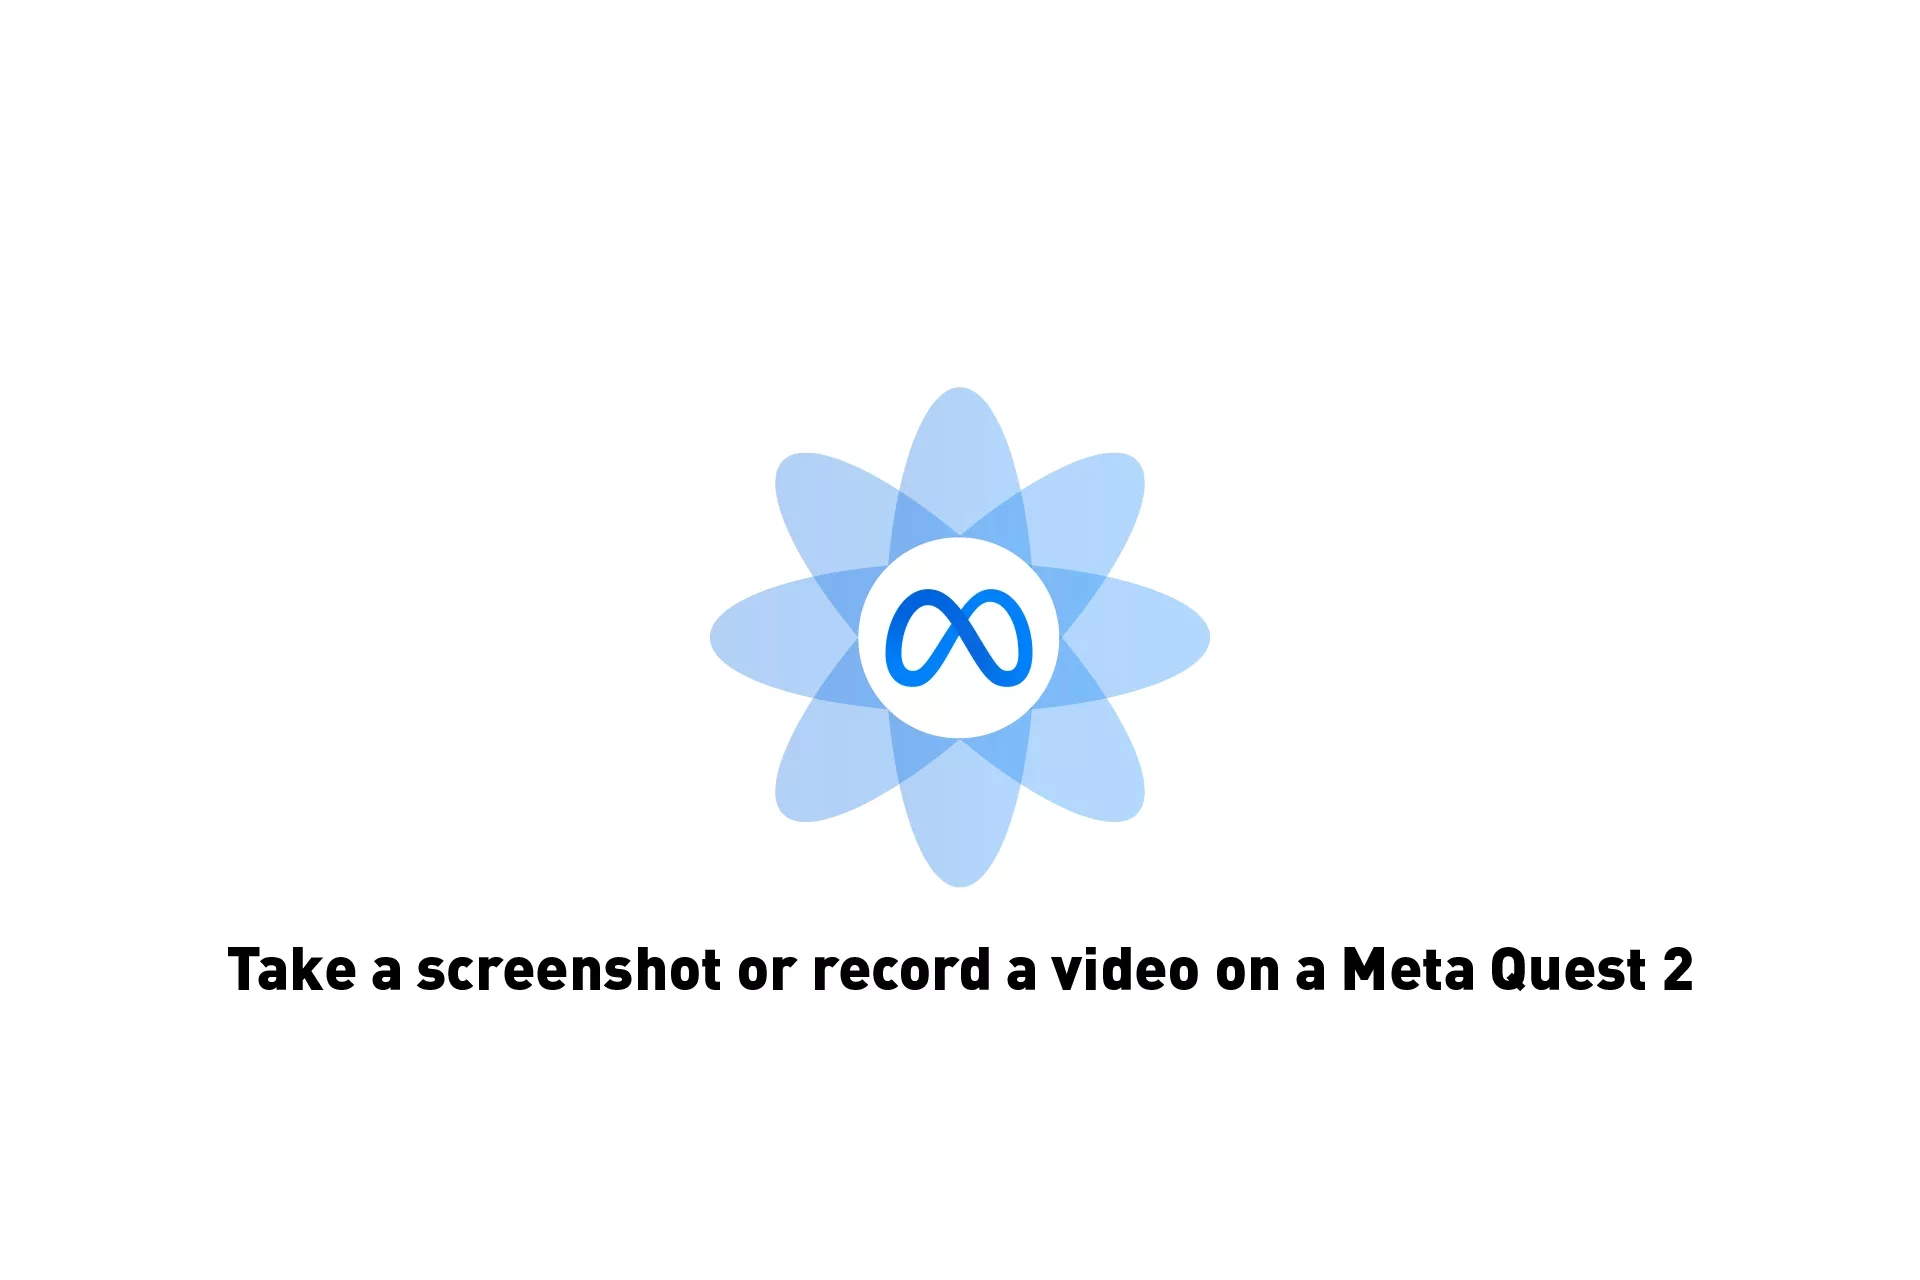 A flower that represents Meta with the text "Take a screenshot or record a video on a Meta Quest 2" beneath it.